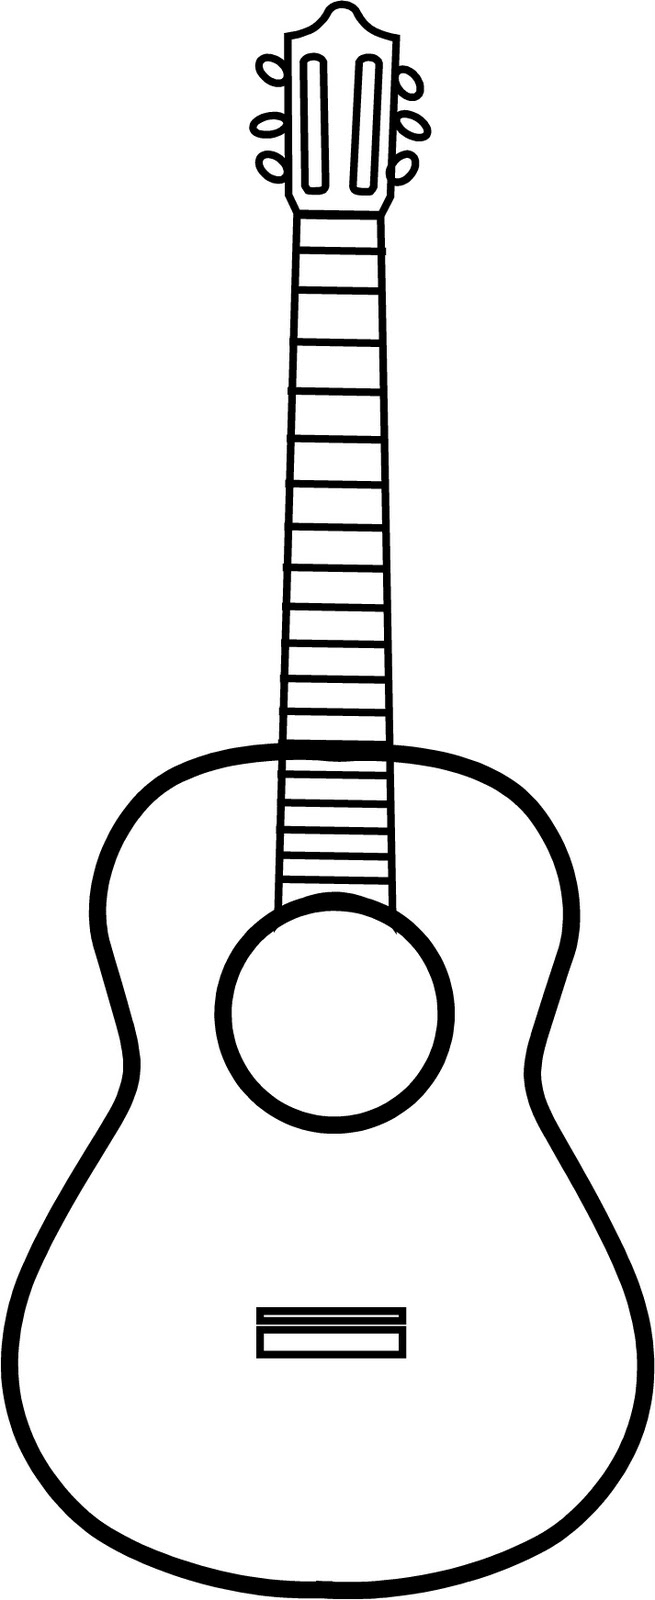 Free Big Guitar Outline Drawing Download Free Big Guitar Outline Drawing Png Images Free Cliparts On Clipart Library